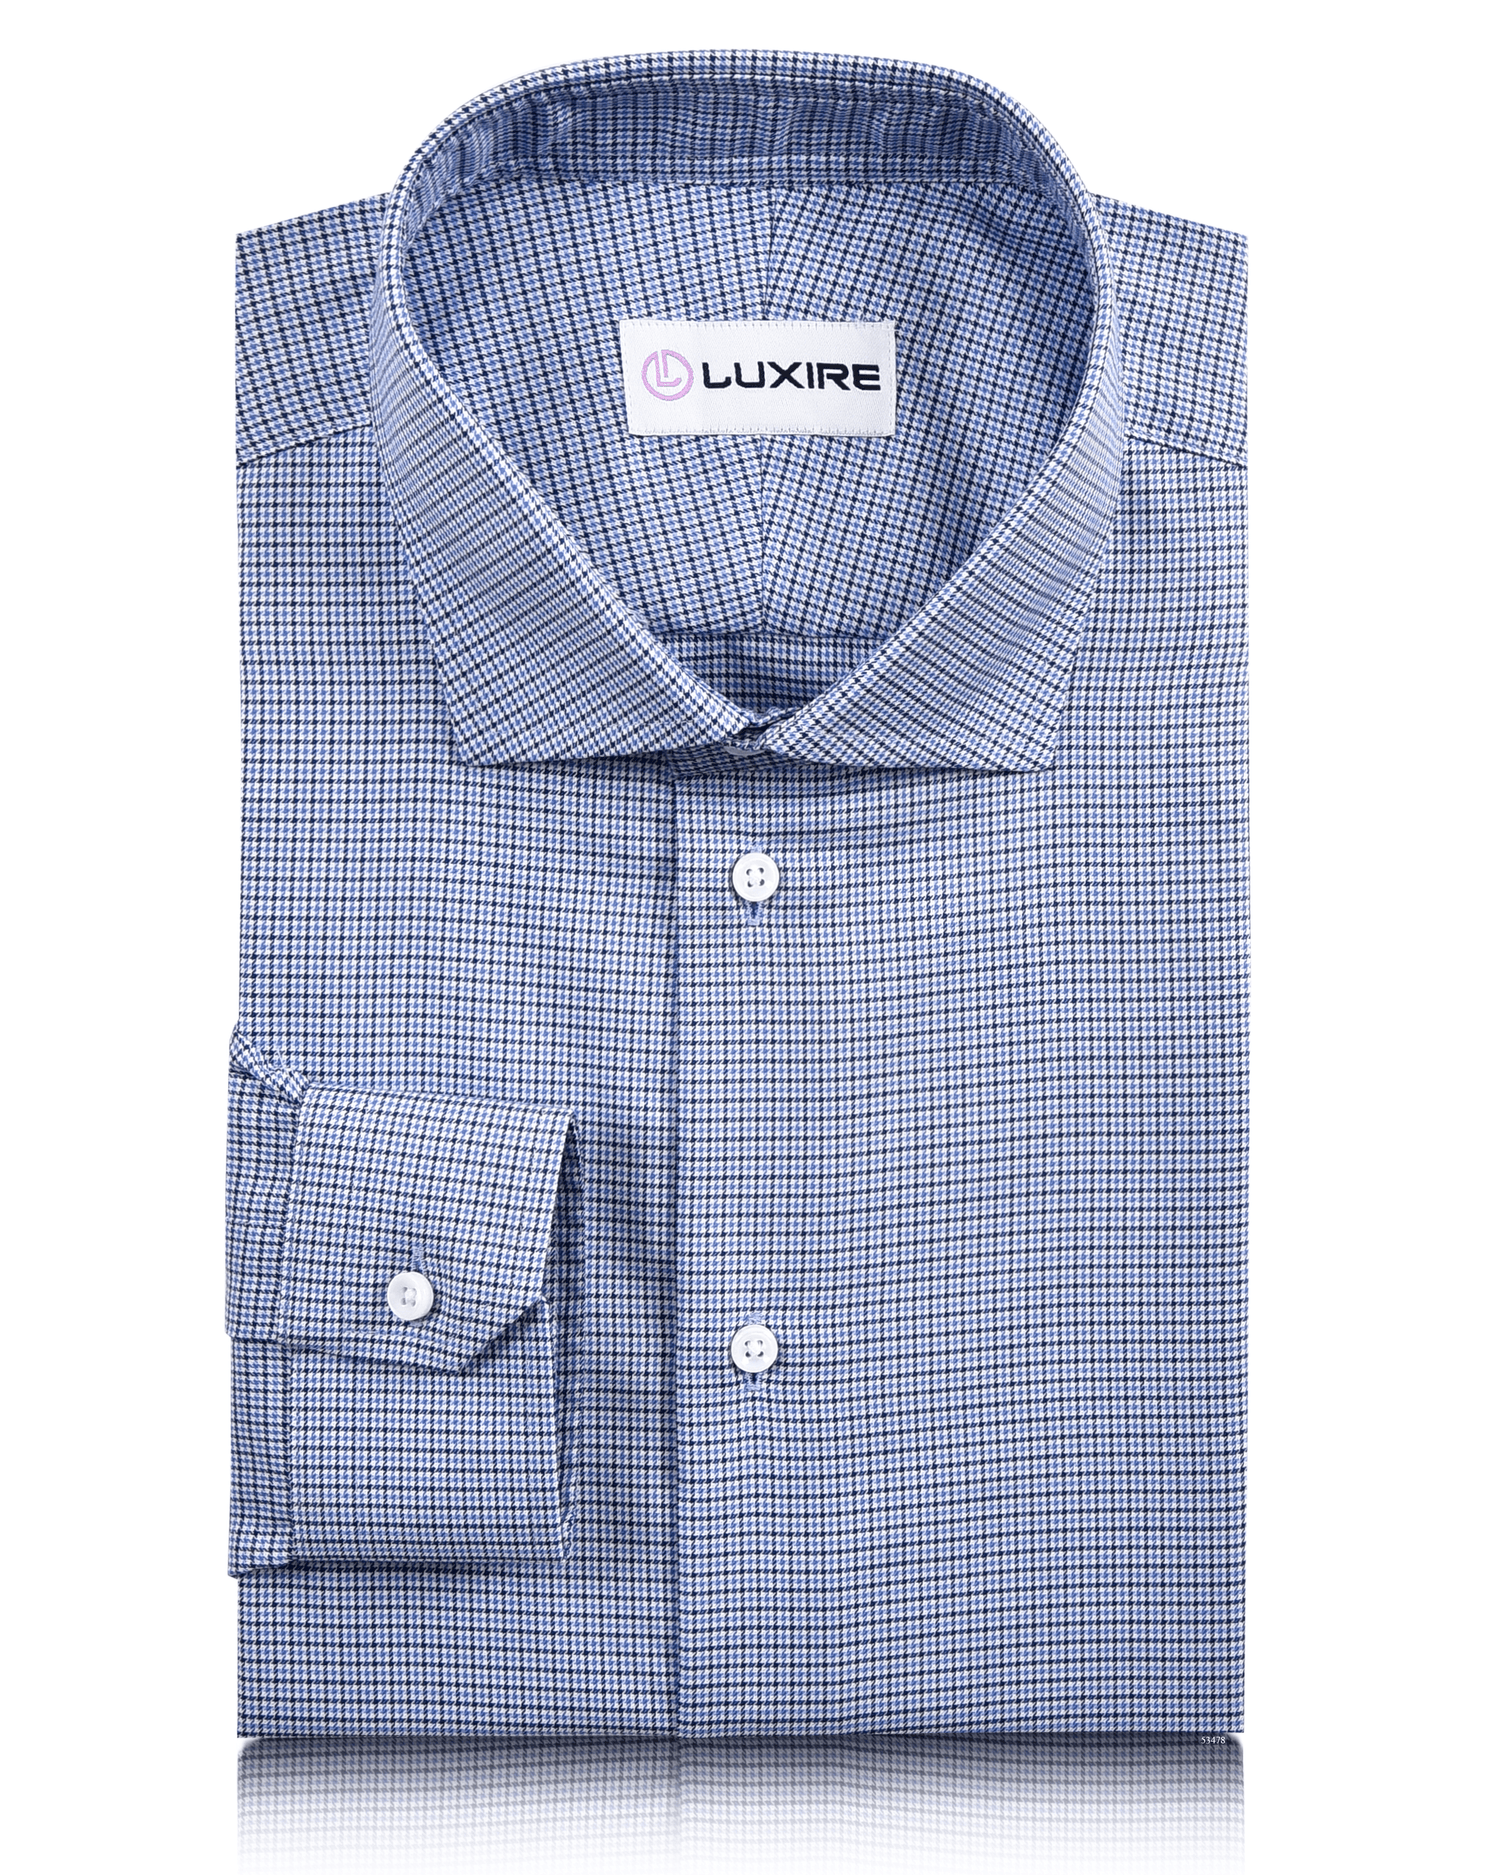 Front view of custom check shirts for men by Luxire blue and white micro houndstooth